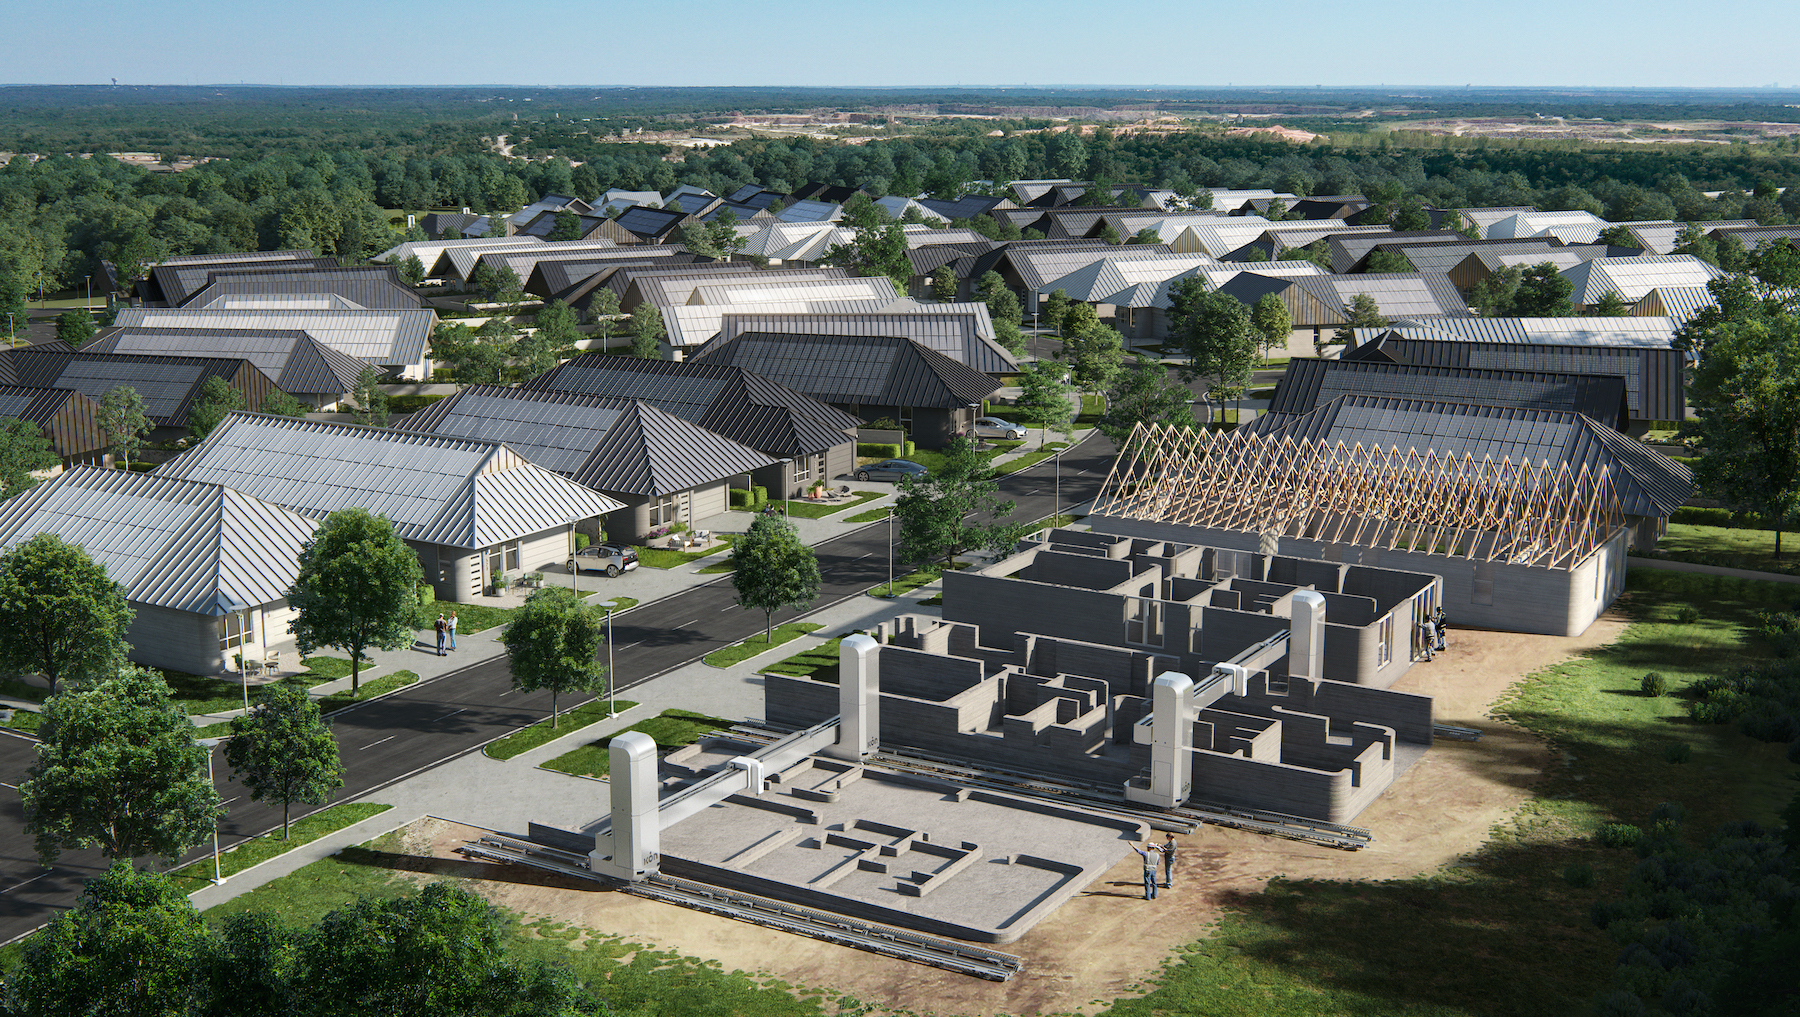 Render of the 3D-Printed Austin Homes by Lennar, BIG, and ICON